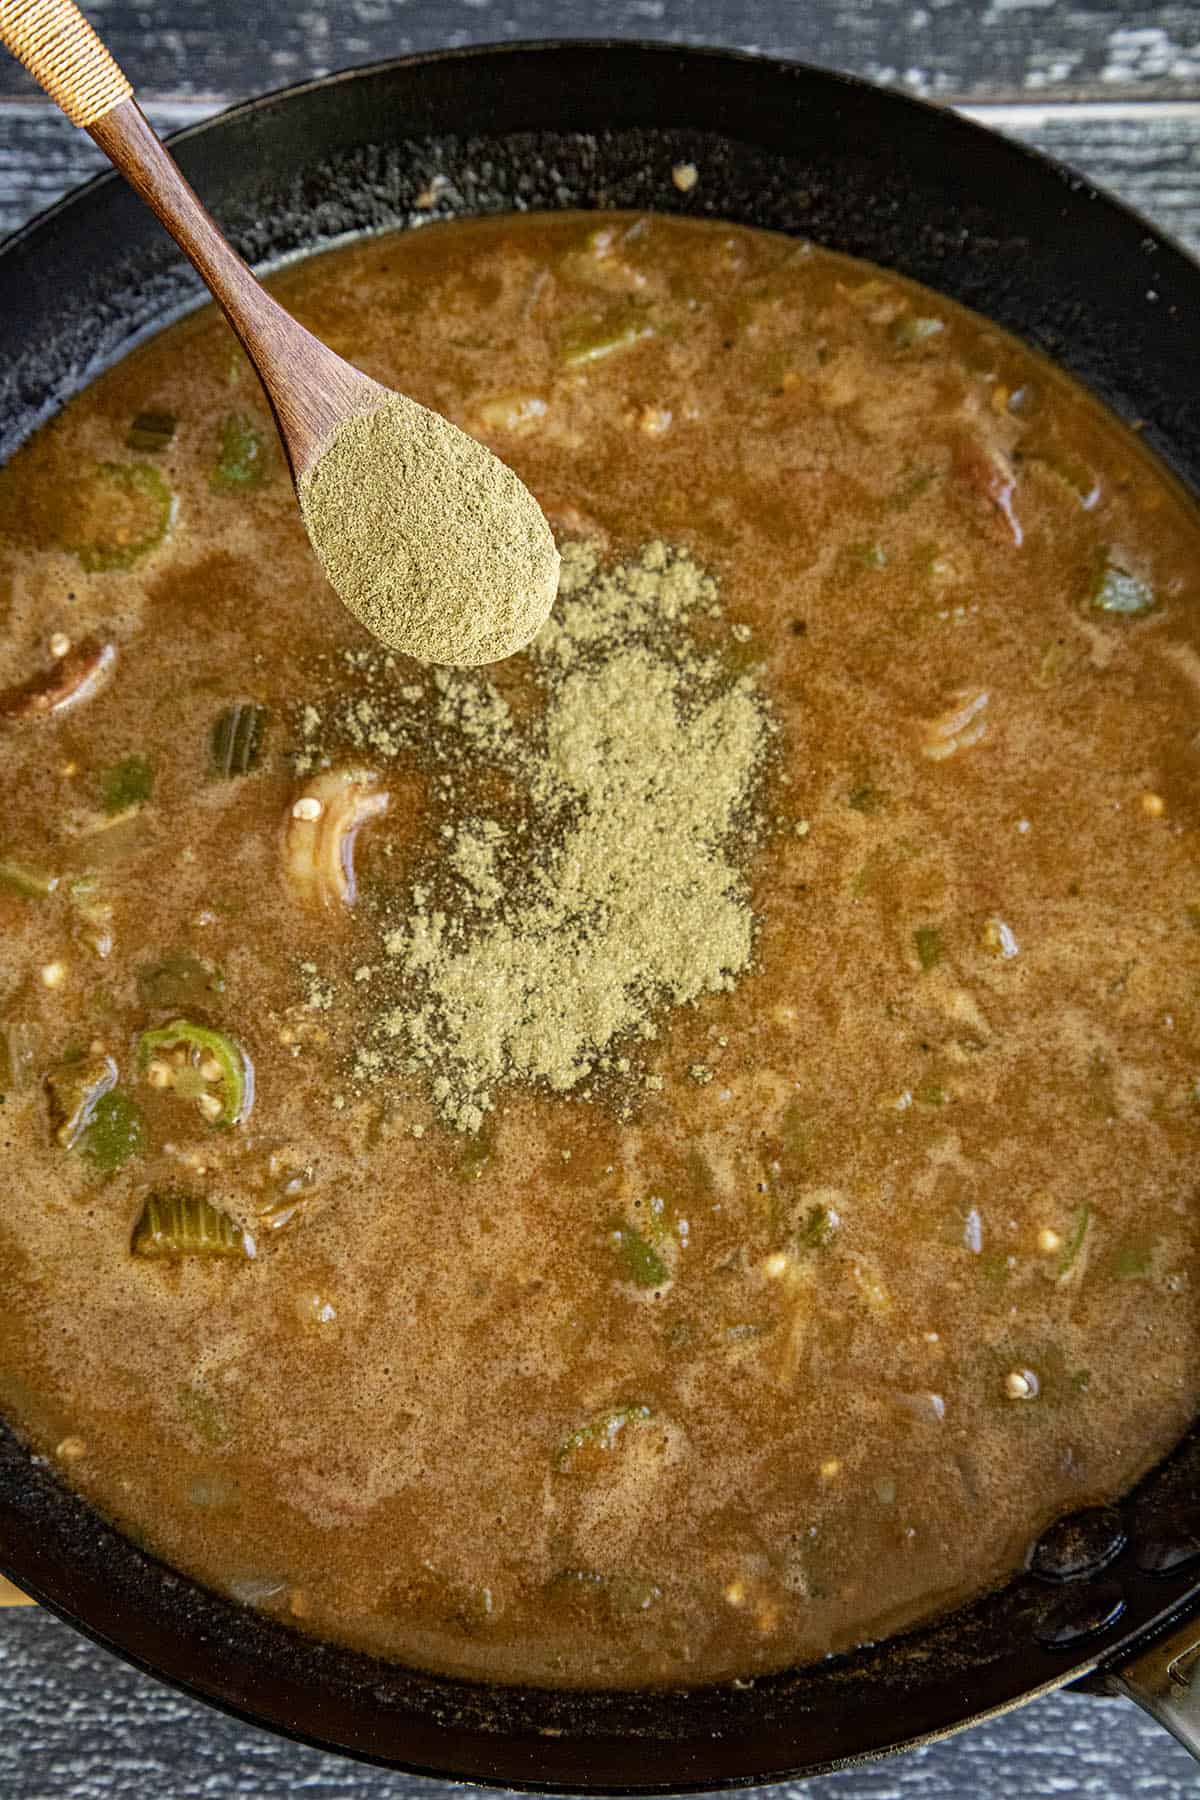 Gumbo File Powder being sprinkled into a pot of gumbo